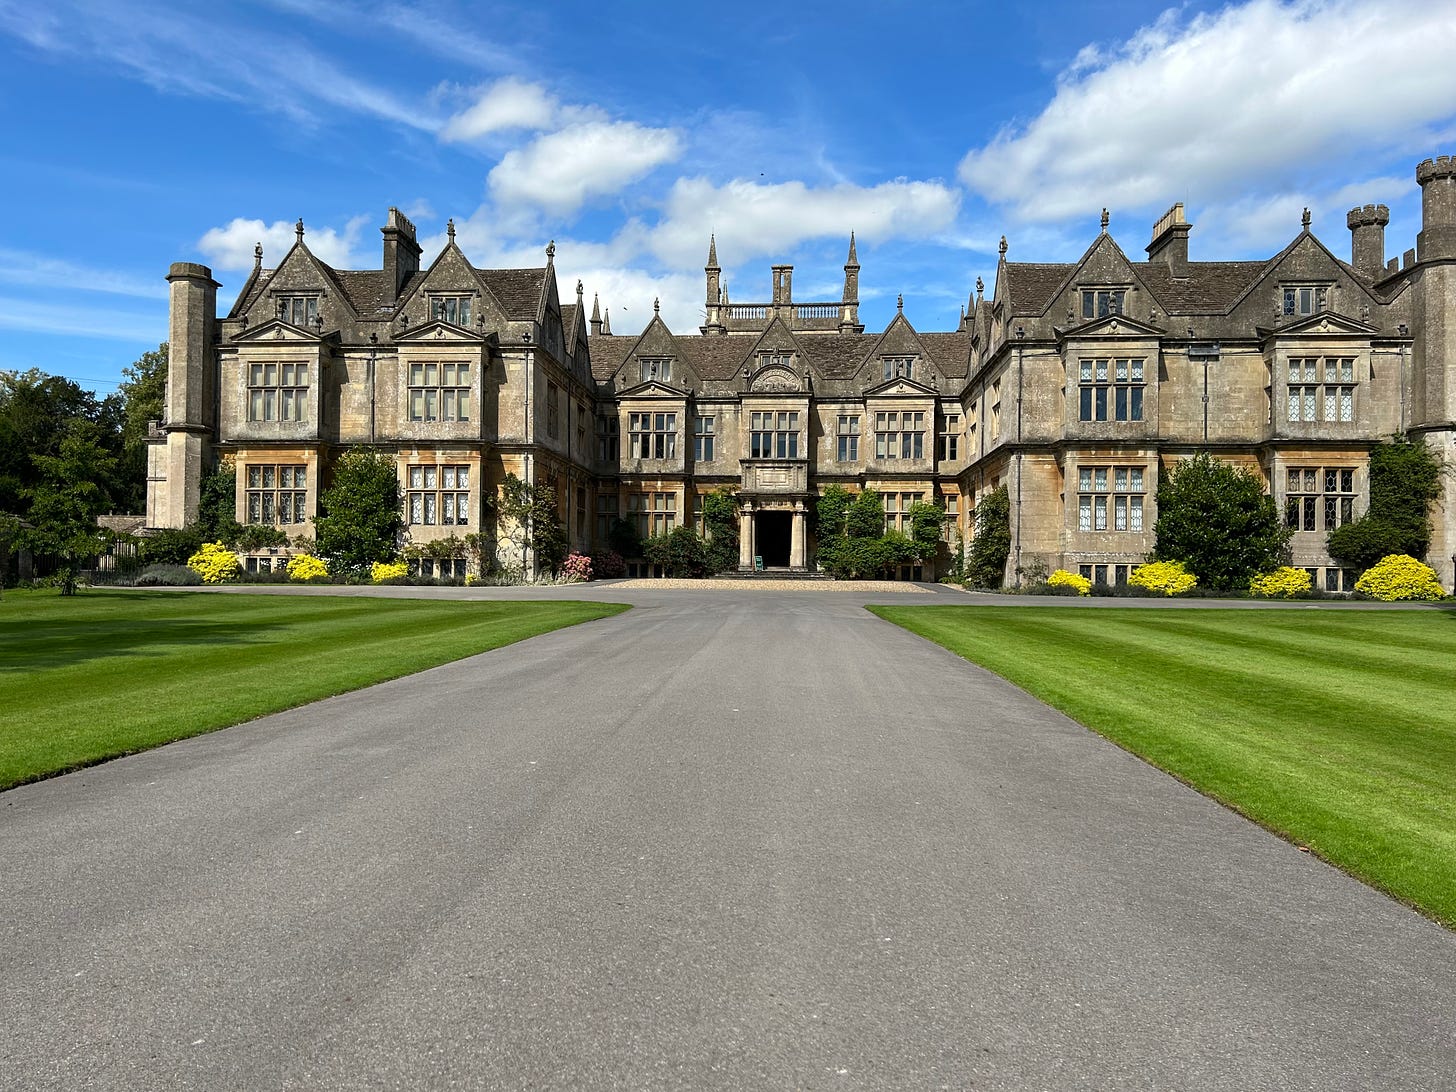 The south facing frontage of Corsham Court. Image: Roland's Travels